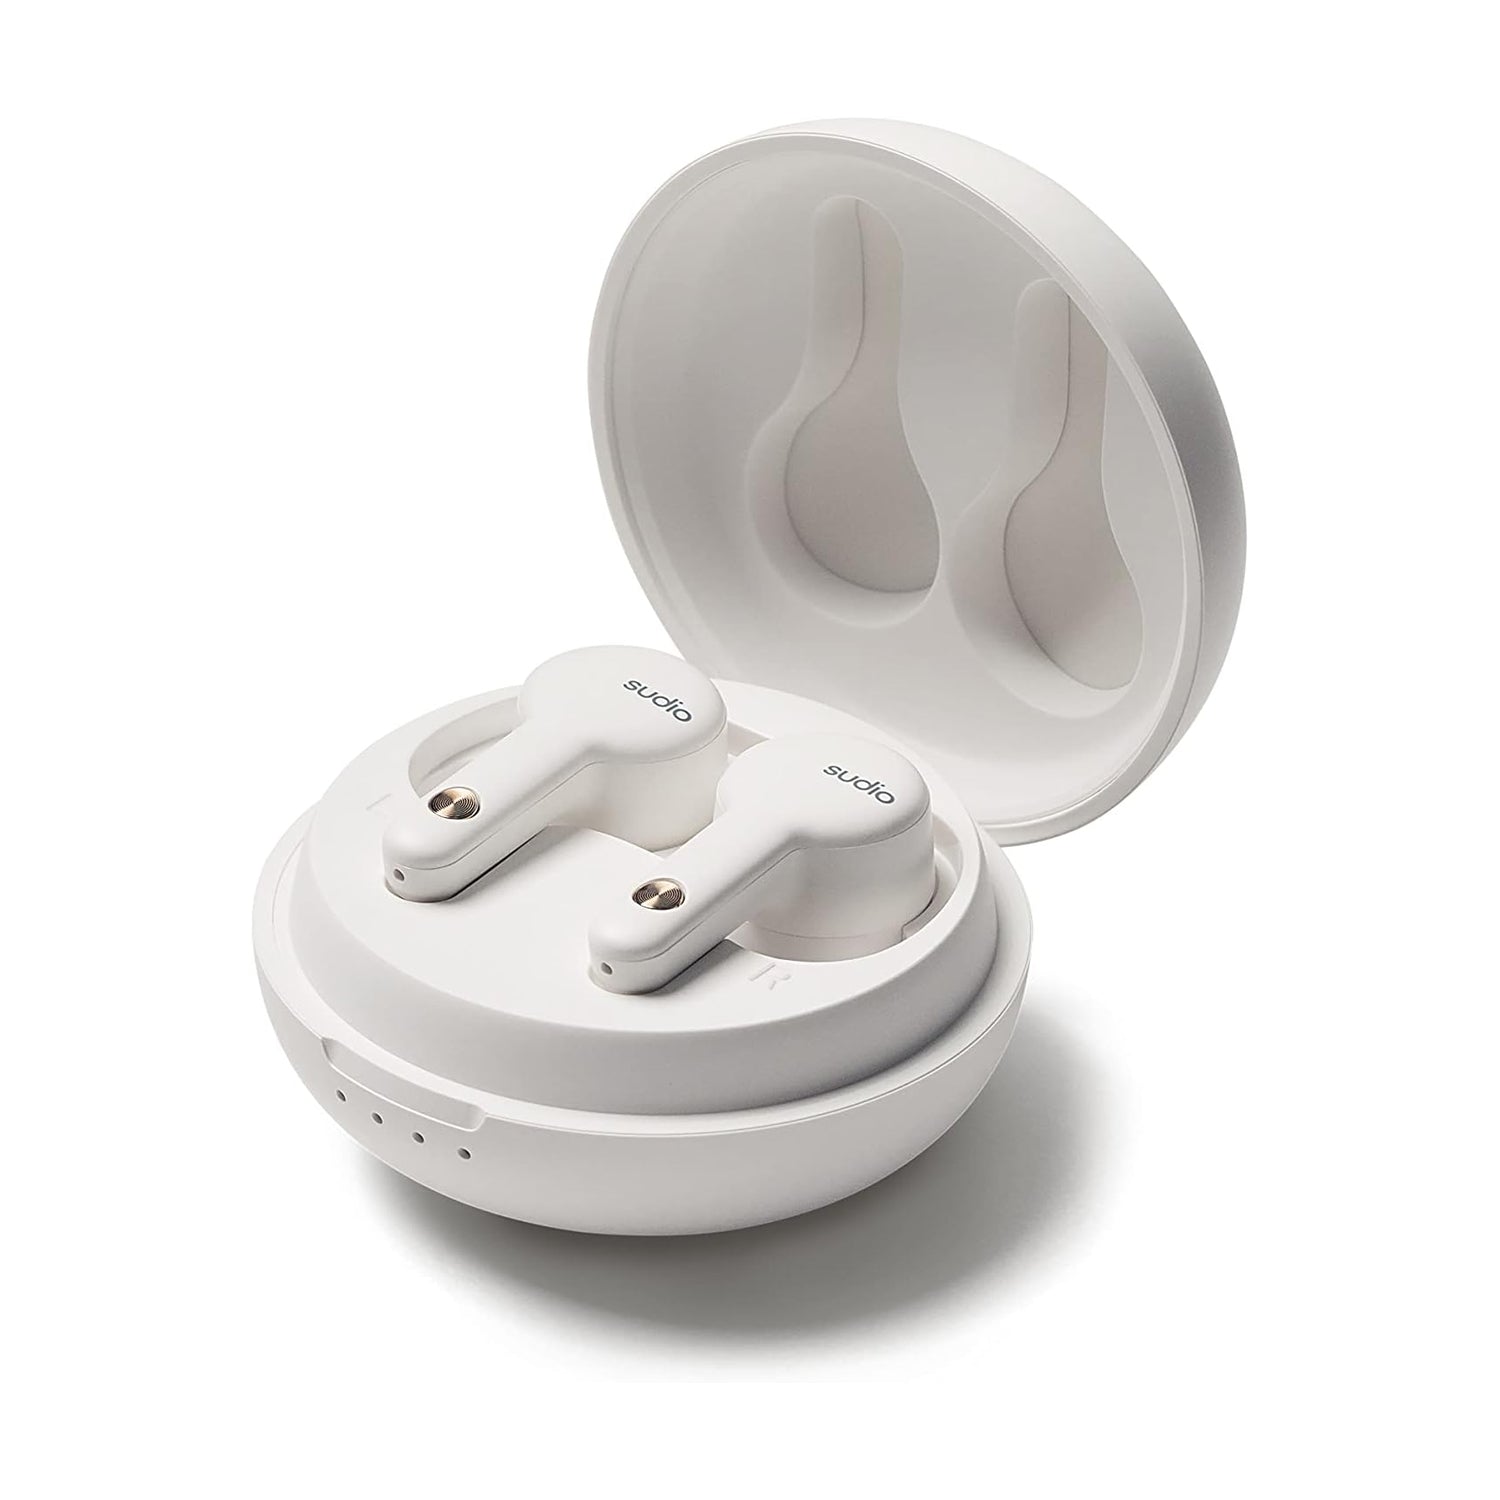 Sudio A2 True Wireless Earbuds with Active Noise Cancellation